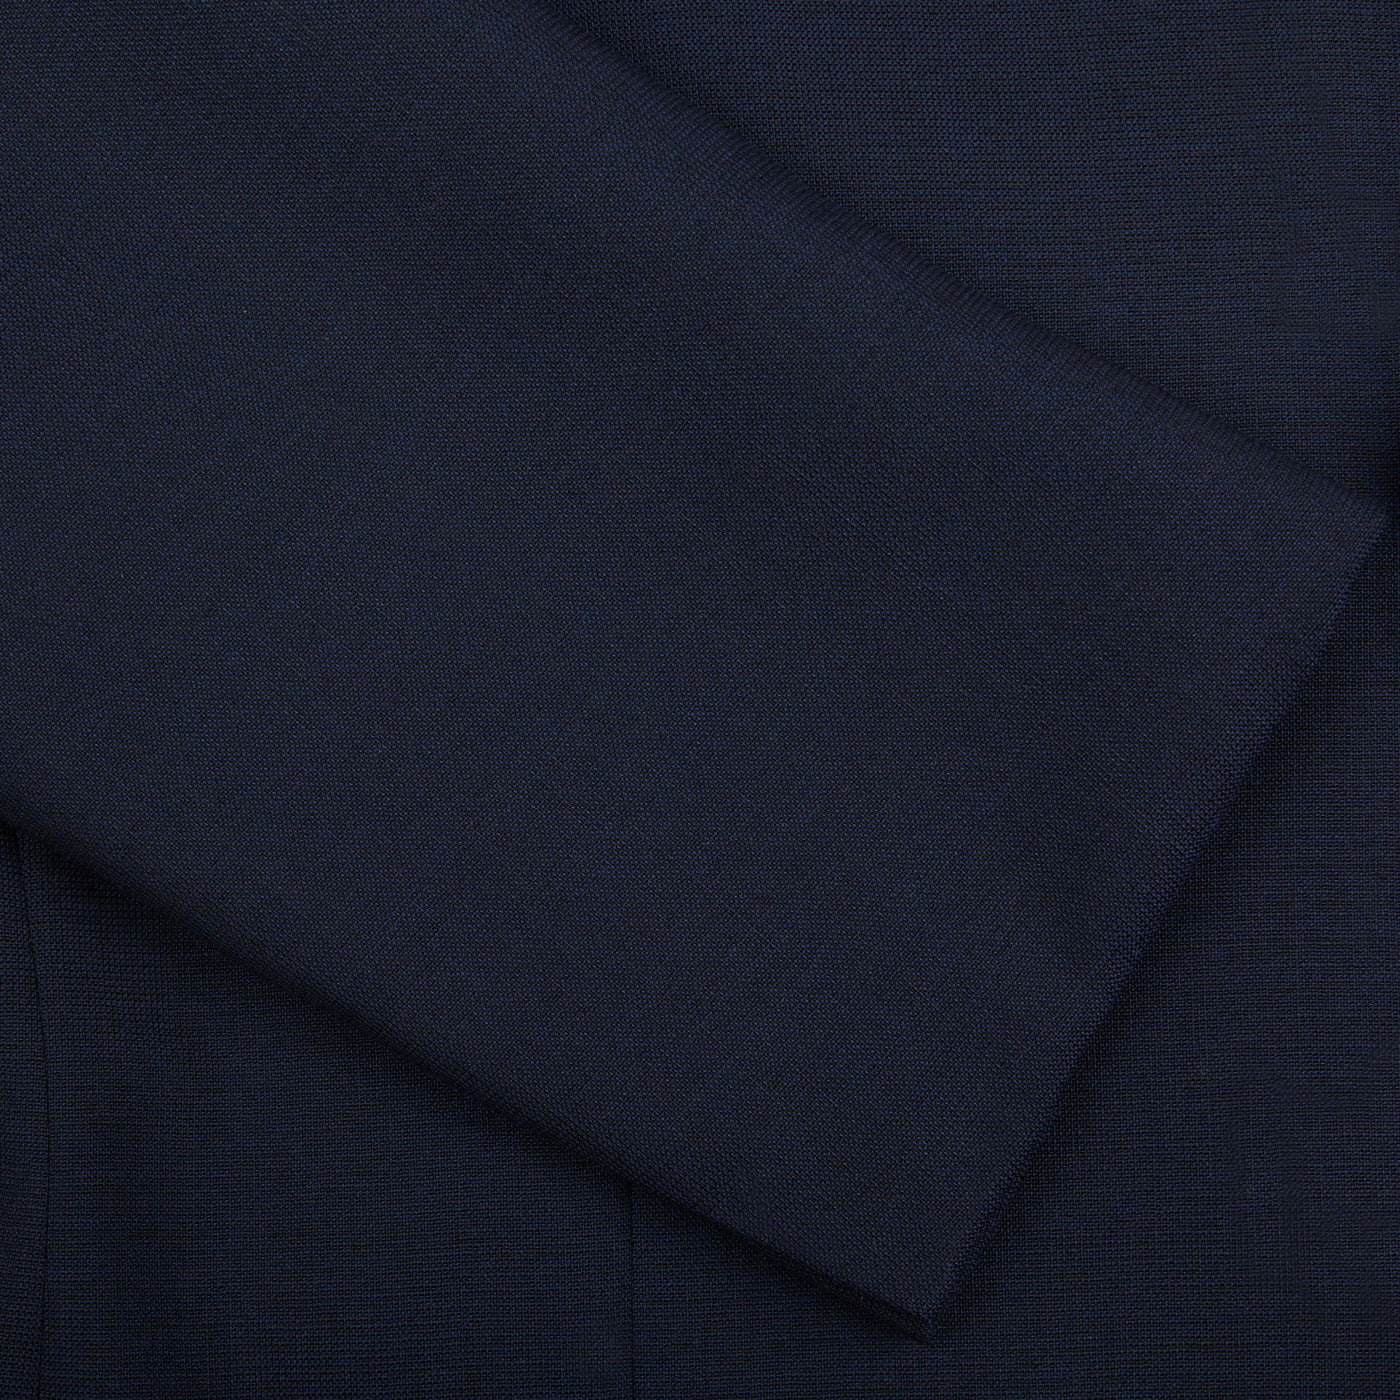 Close-up of a Navy Blue High Twist Wool Suit fabric texture from Ring Jacket, possibly from a garment, showing detailed weave patterns and light folds.